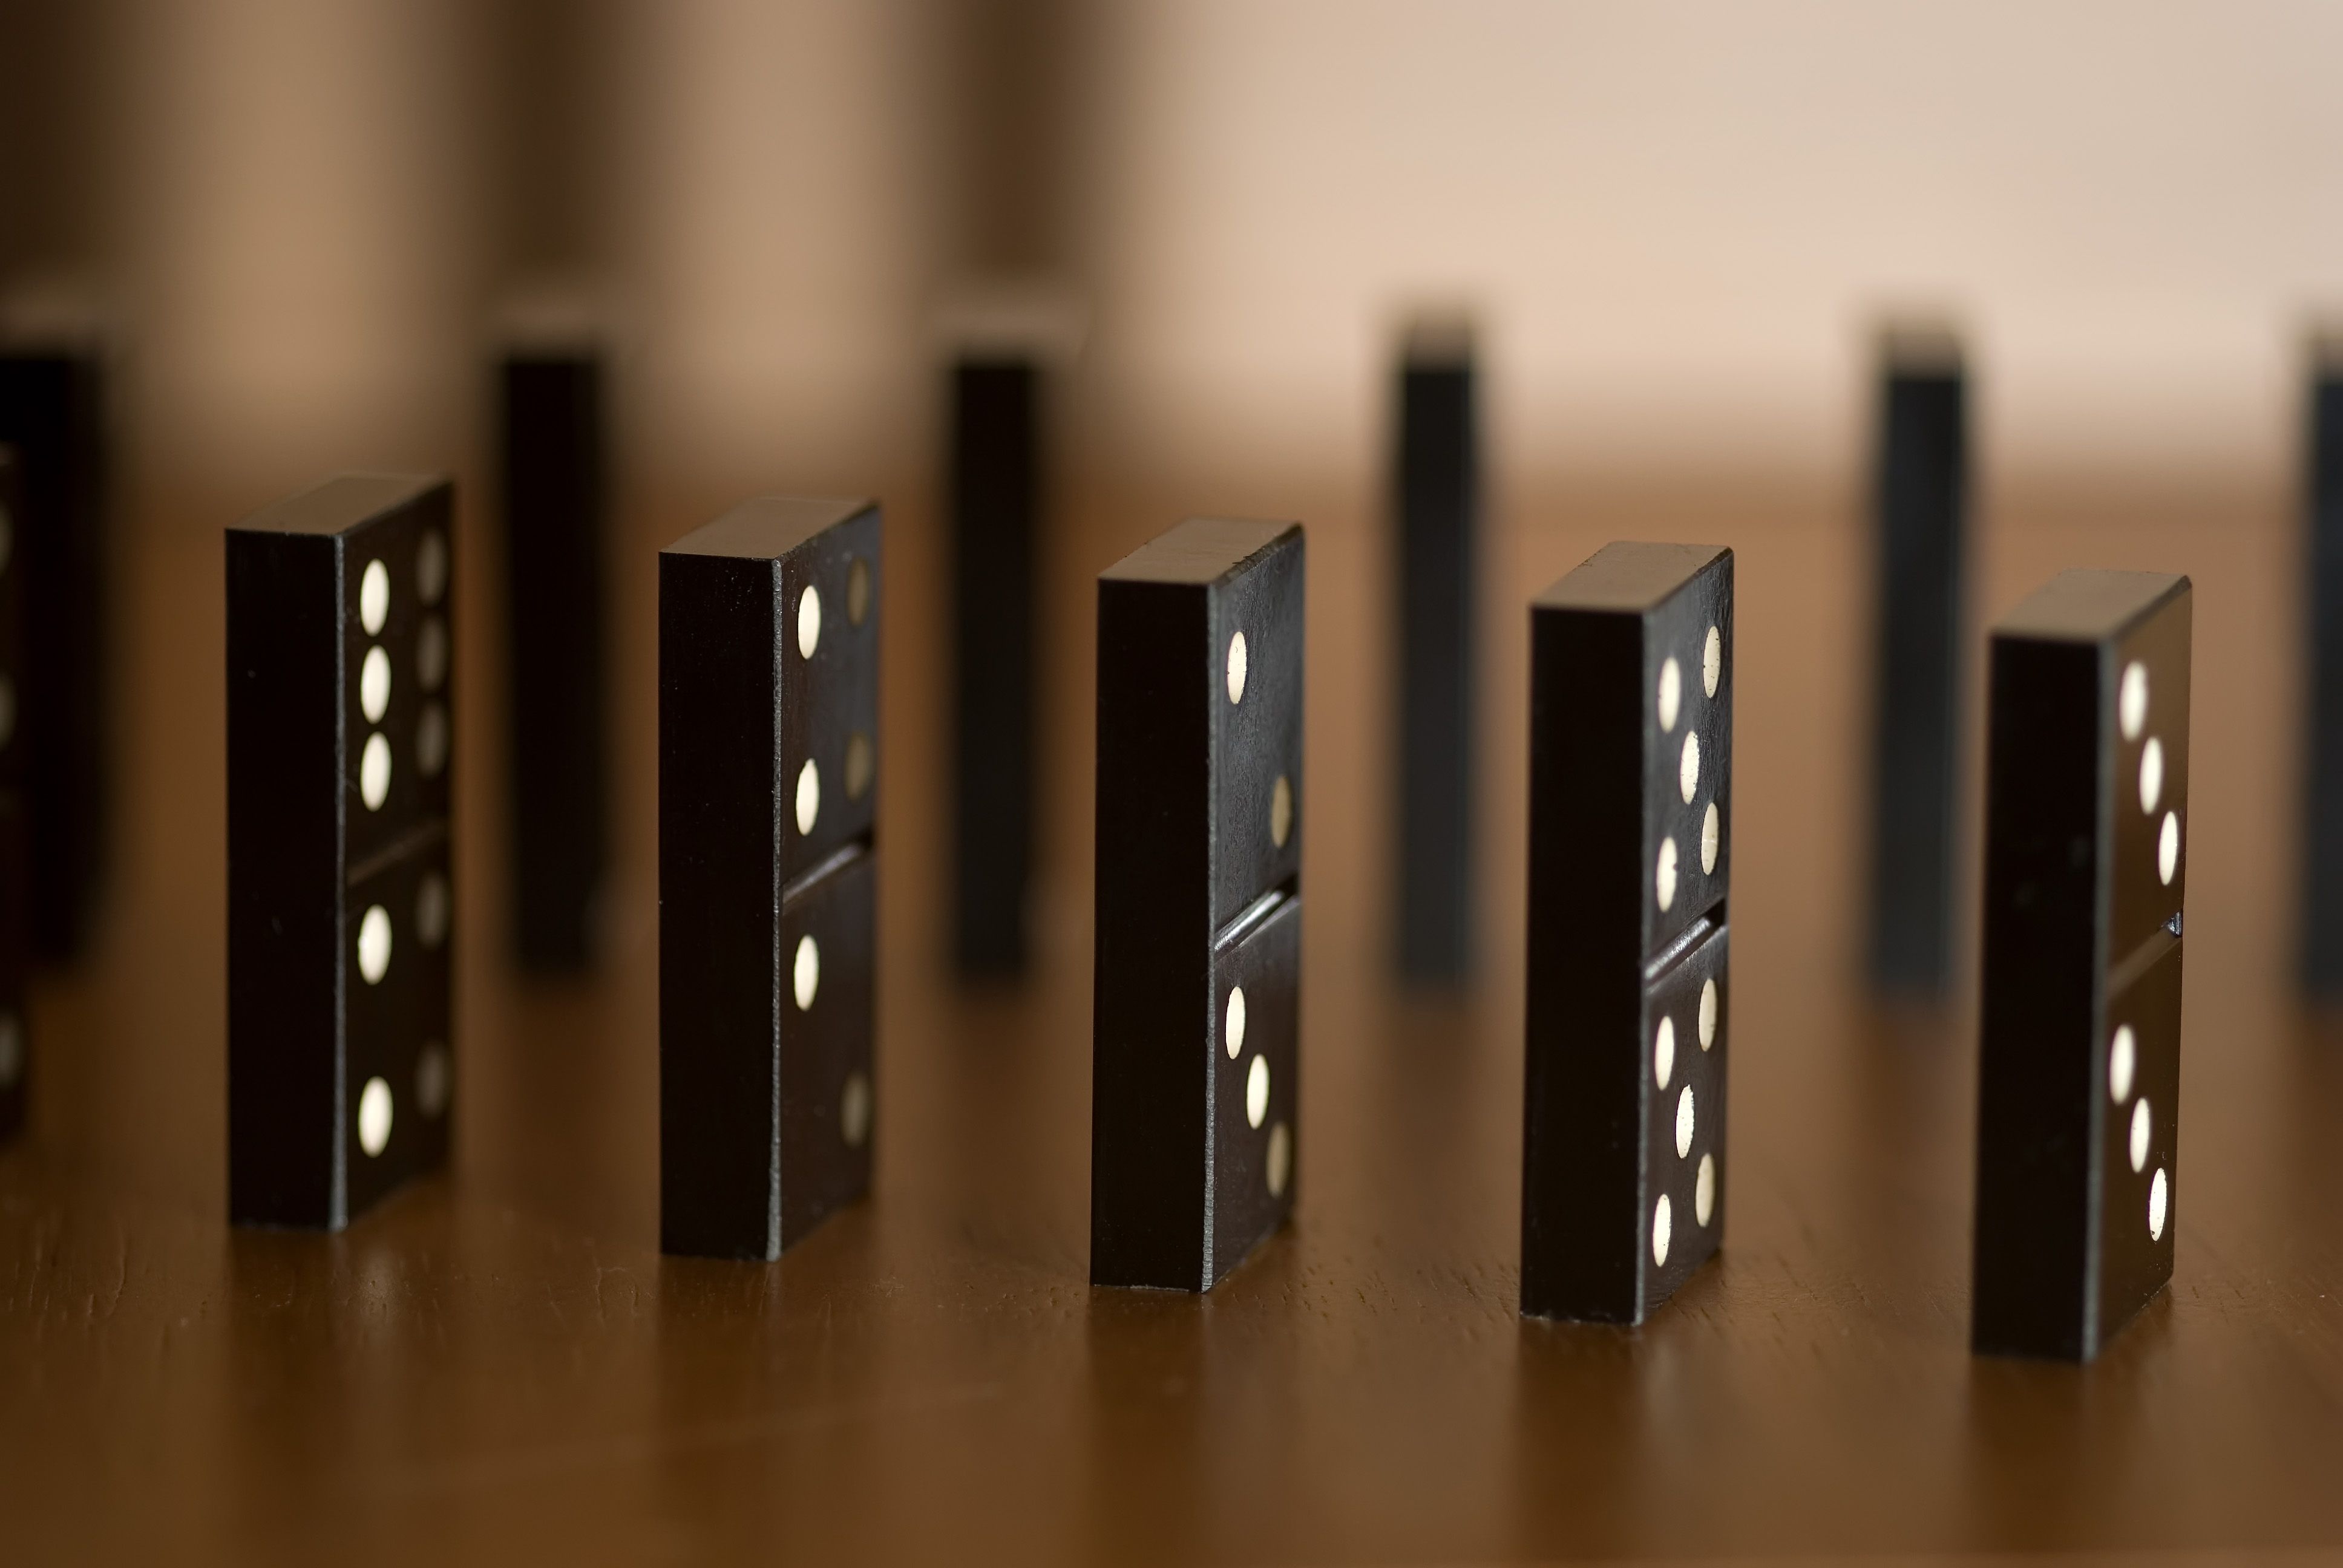 Game Dominos HD Wallpaper | Background Image